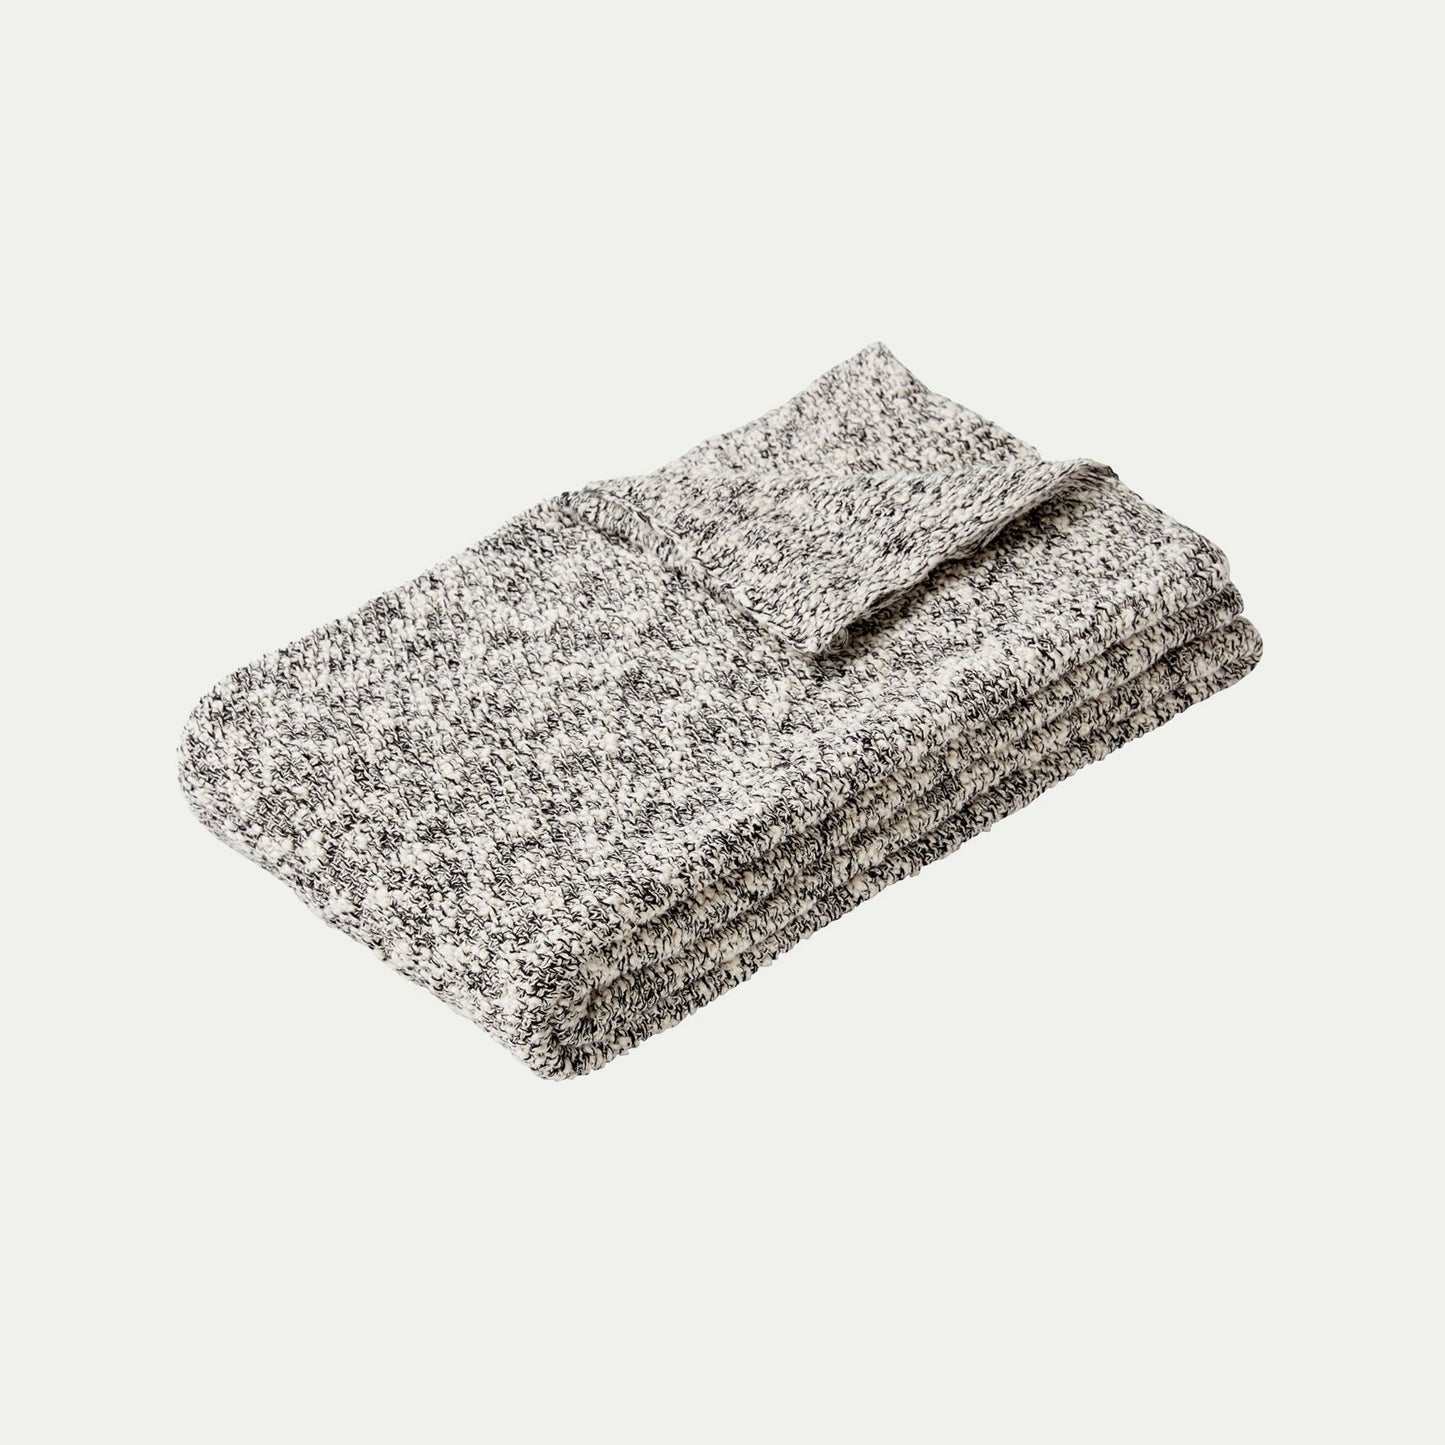 Hubsch Interior boucle cotton knitted throw blanket in grey, white and cream on white background